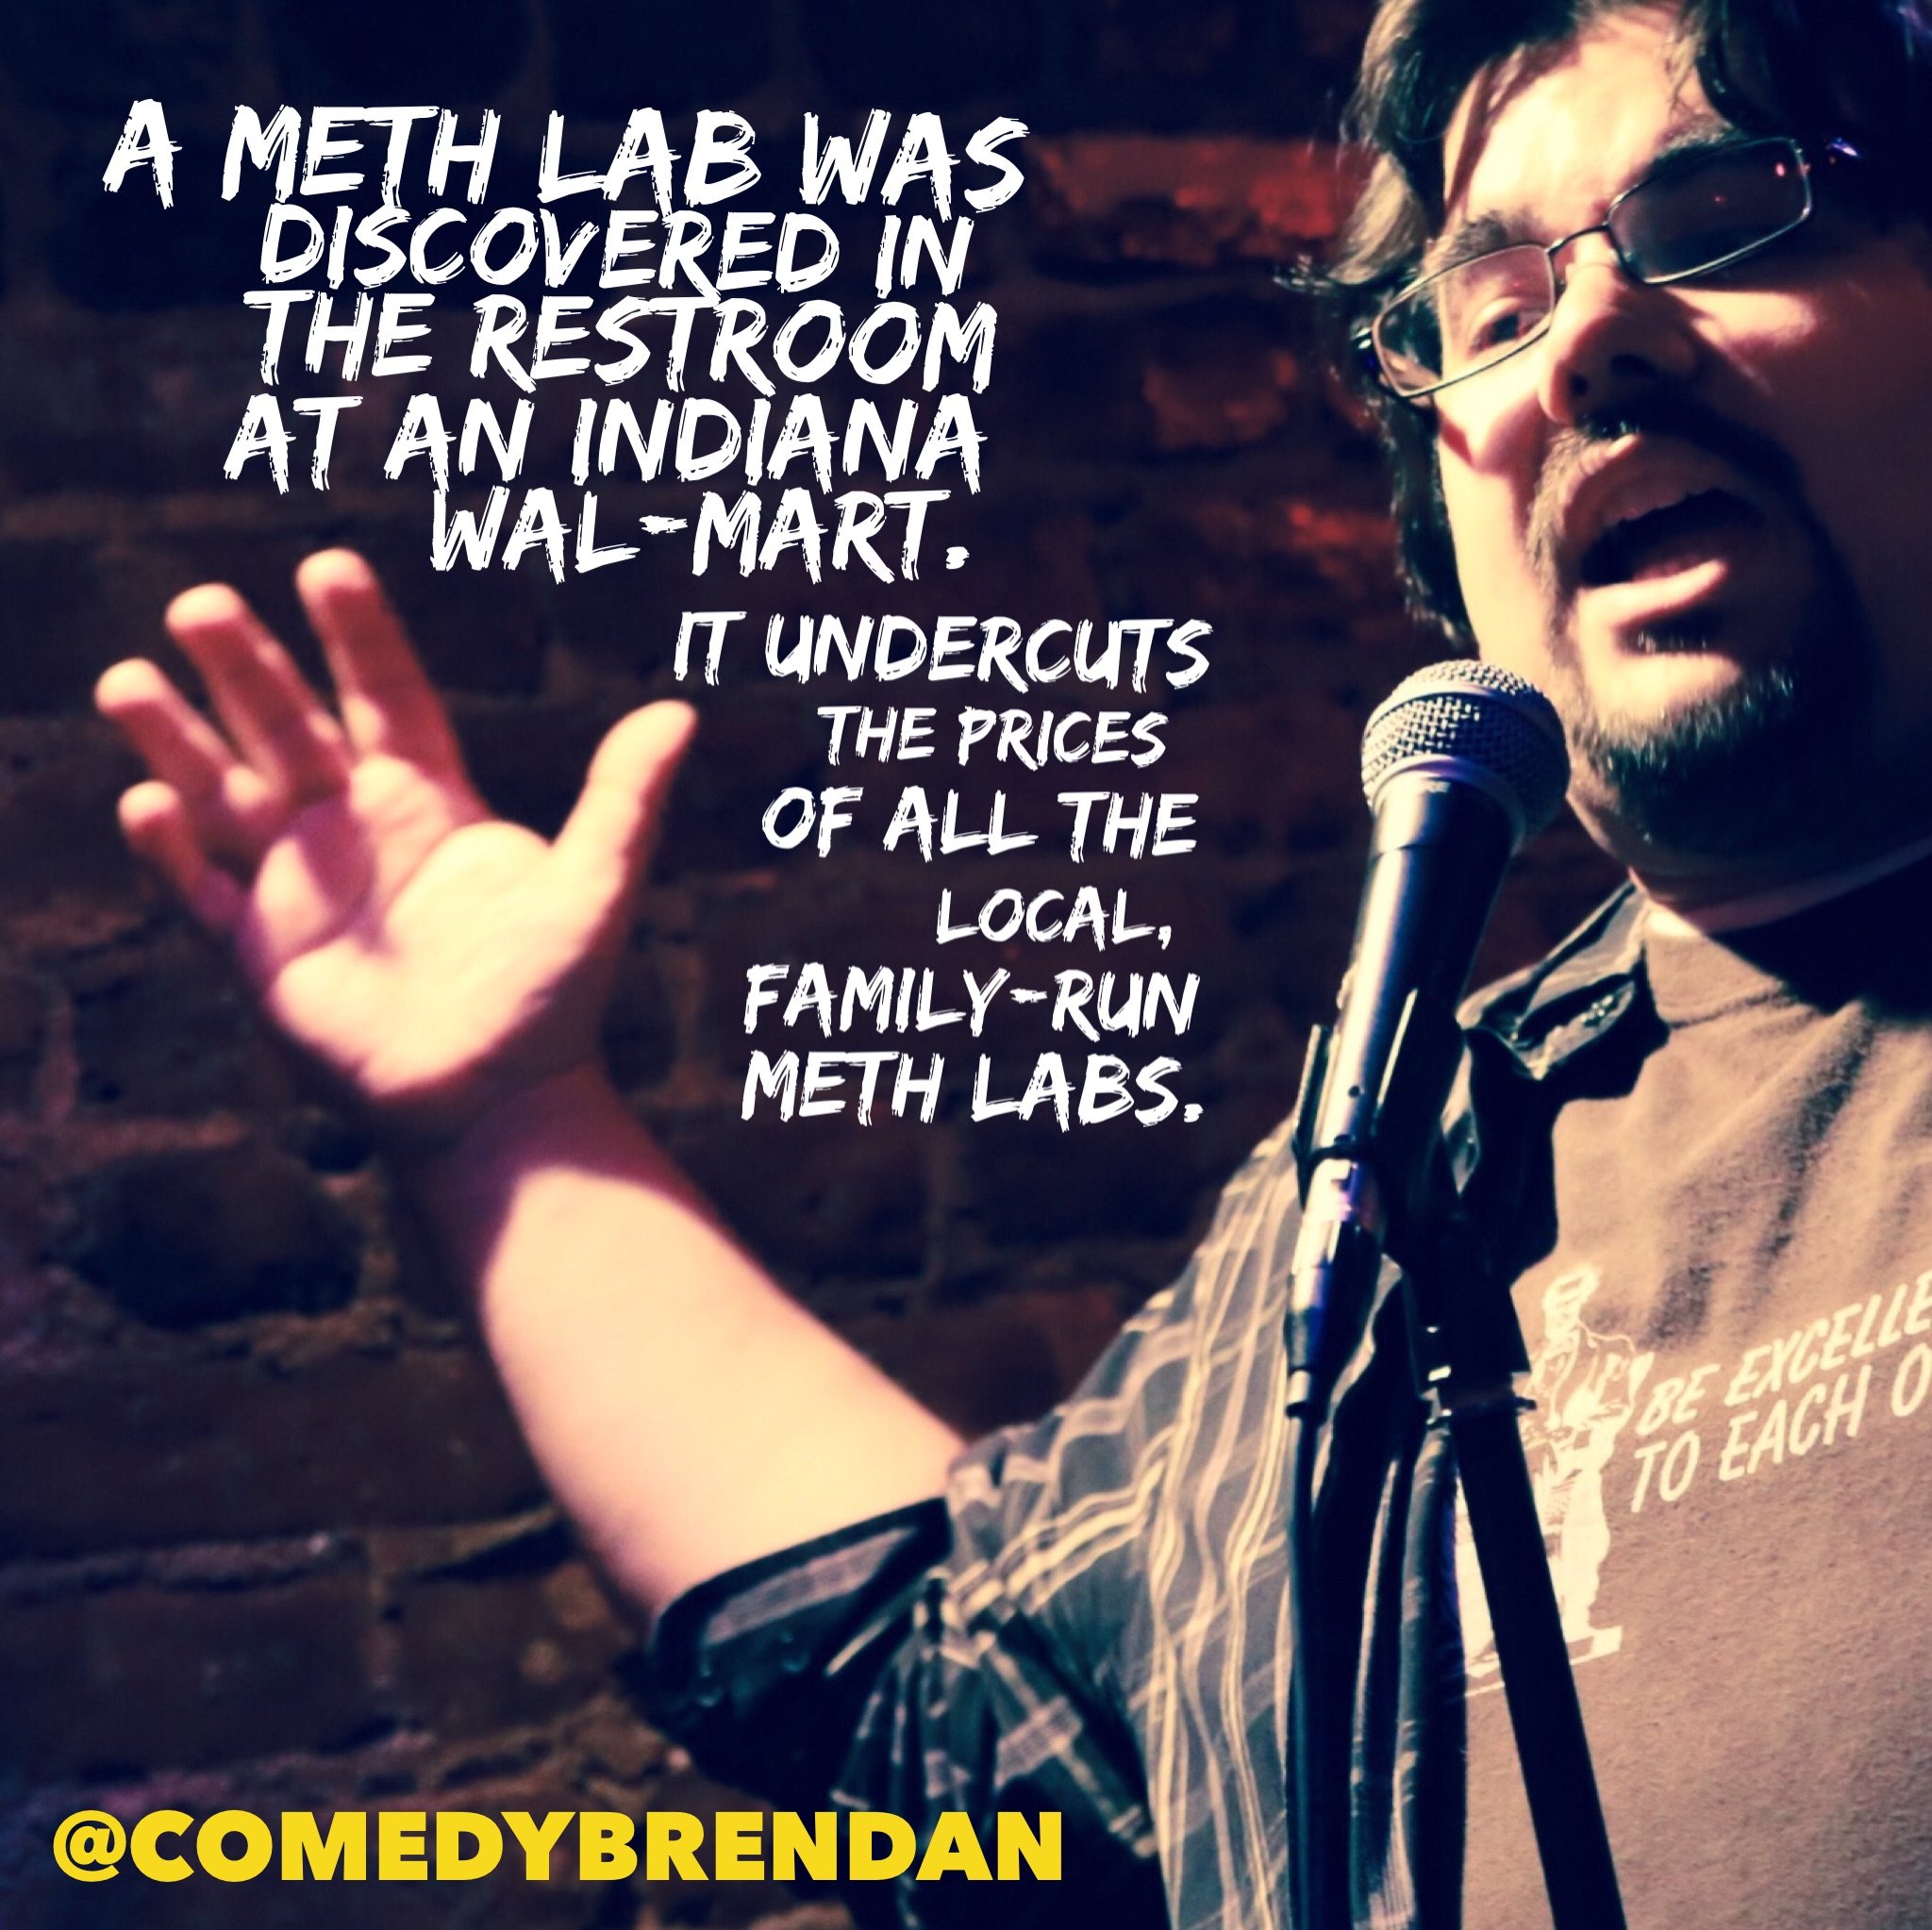 album cover - A Meth Lab Was Discovered In The Restroom At An Indiana WalMart It Undercuts The Prices Of All The Local, FamilyRun Meth Labs. 2